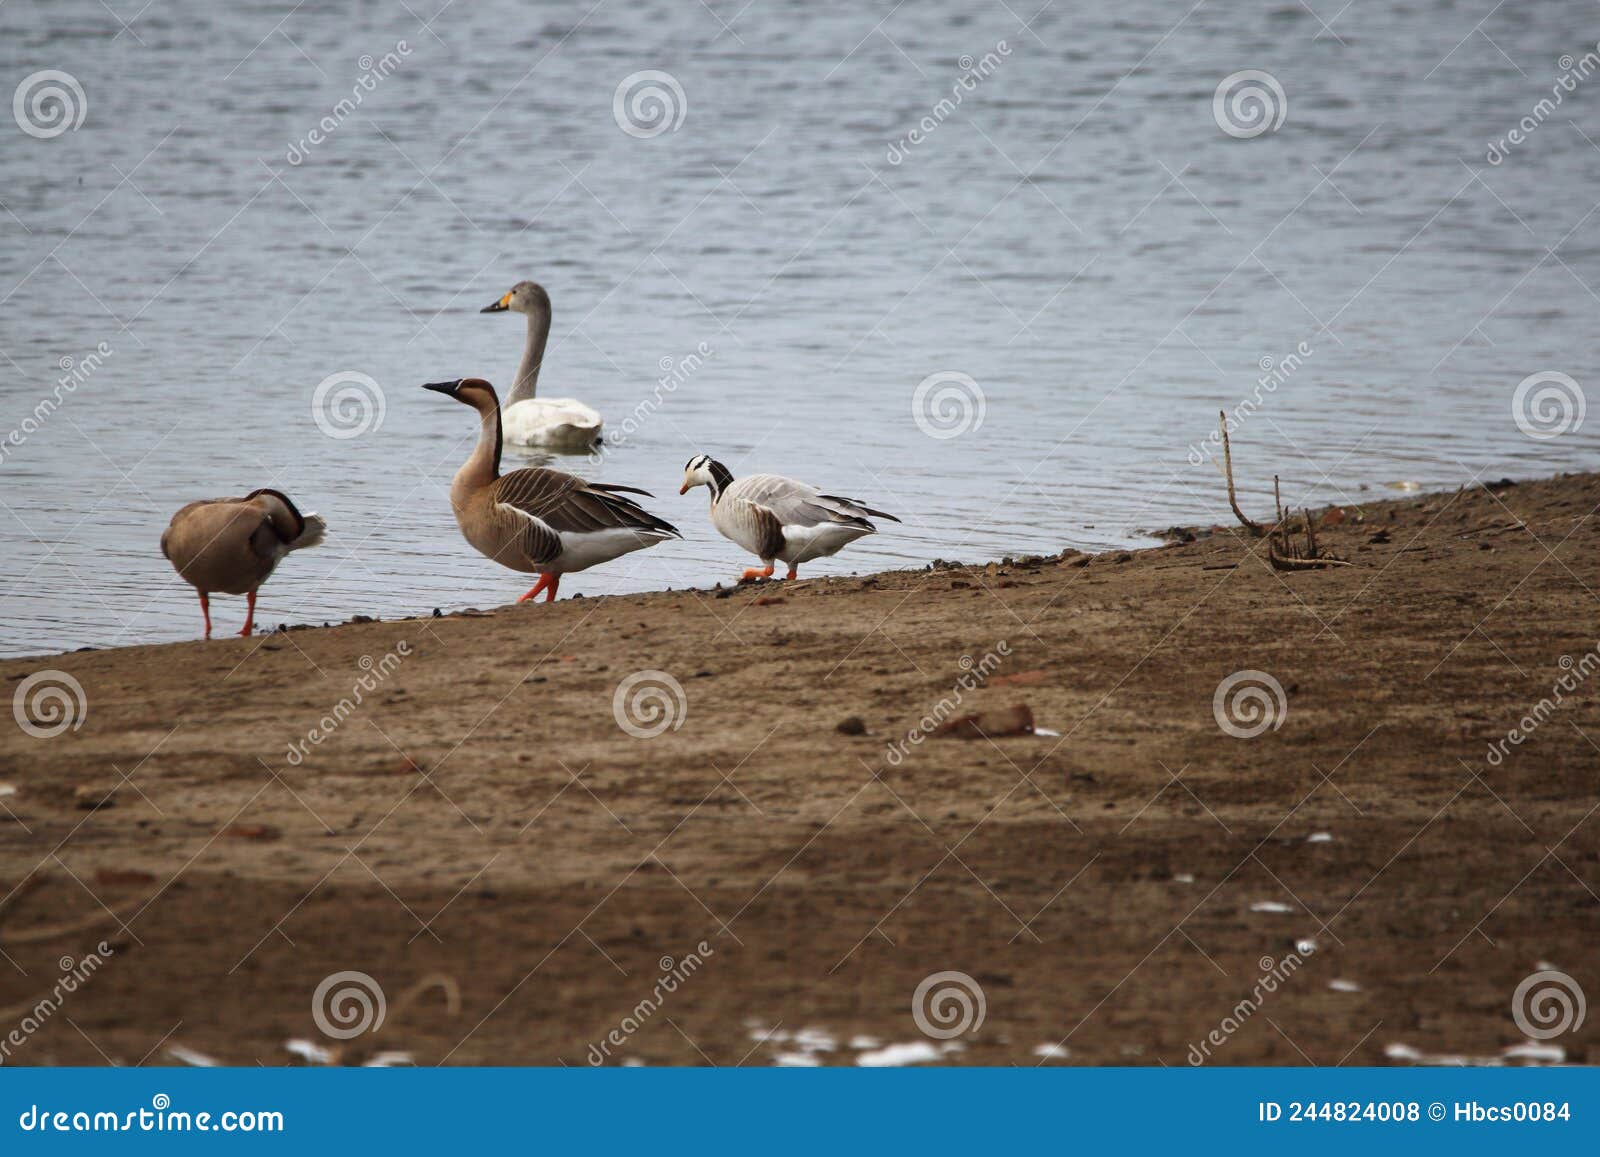 127 Catching Goose Stock Photos - Free & Royalty-Free Stock Photos from  Dreamstime